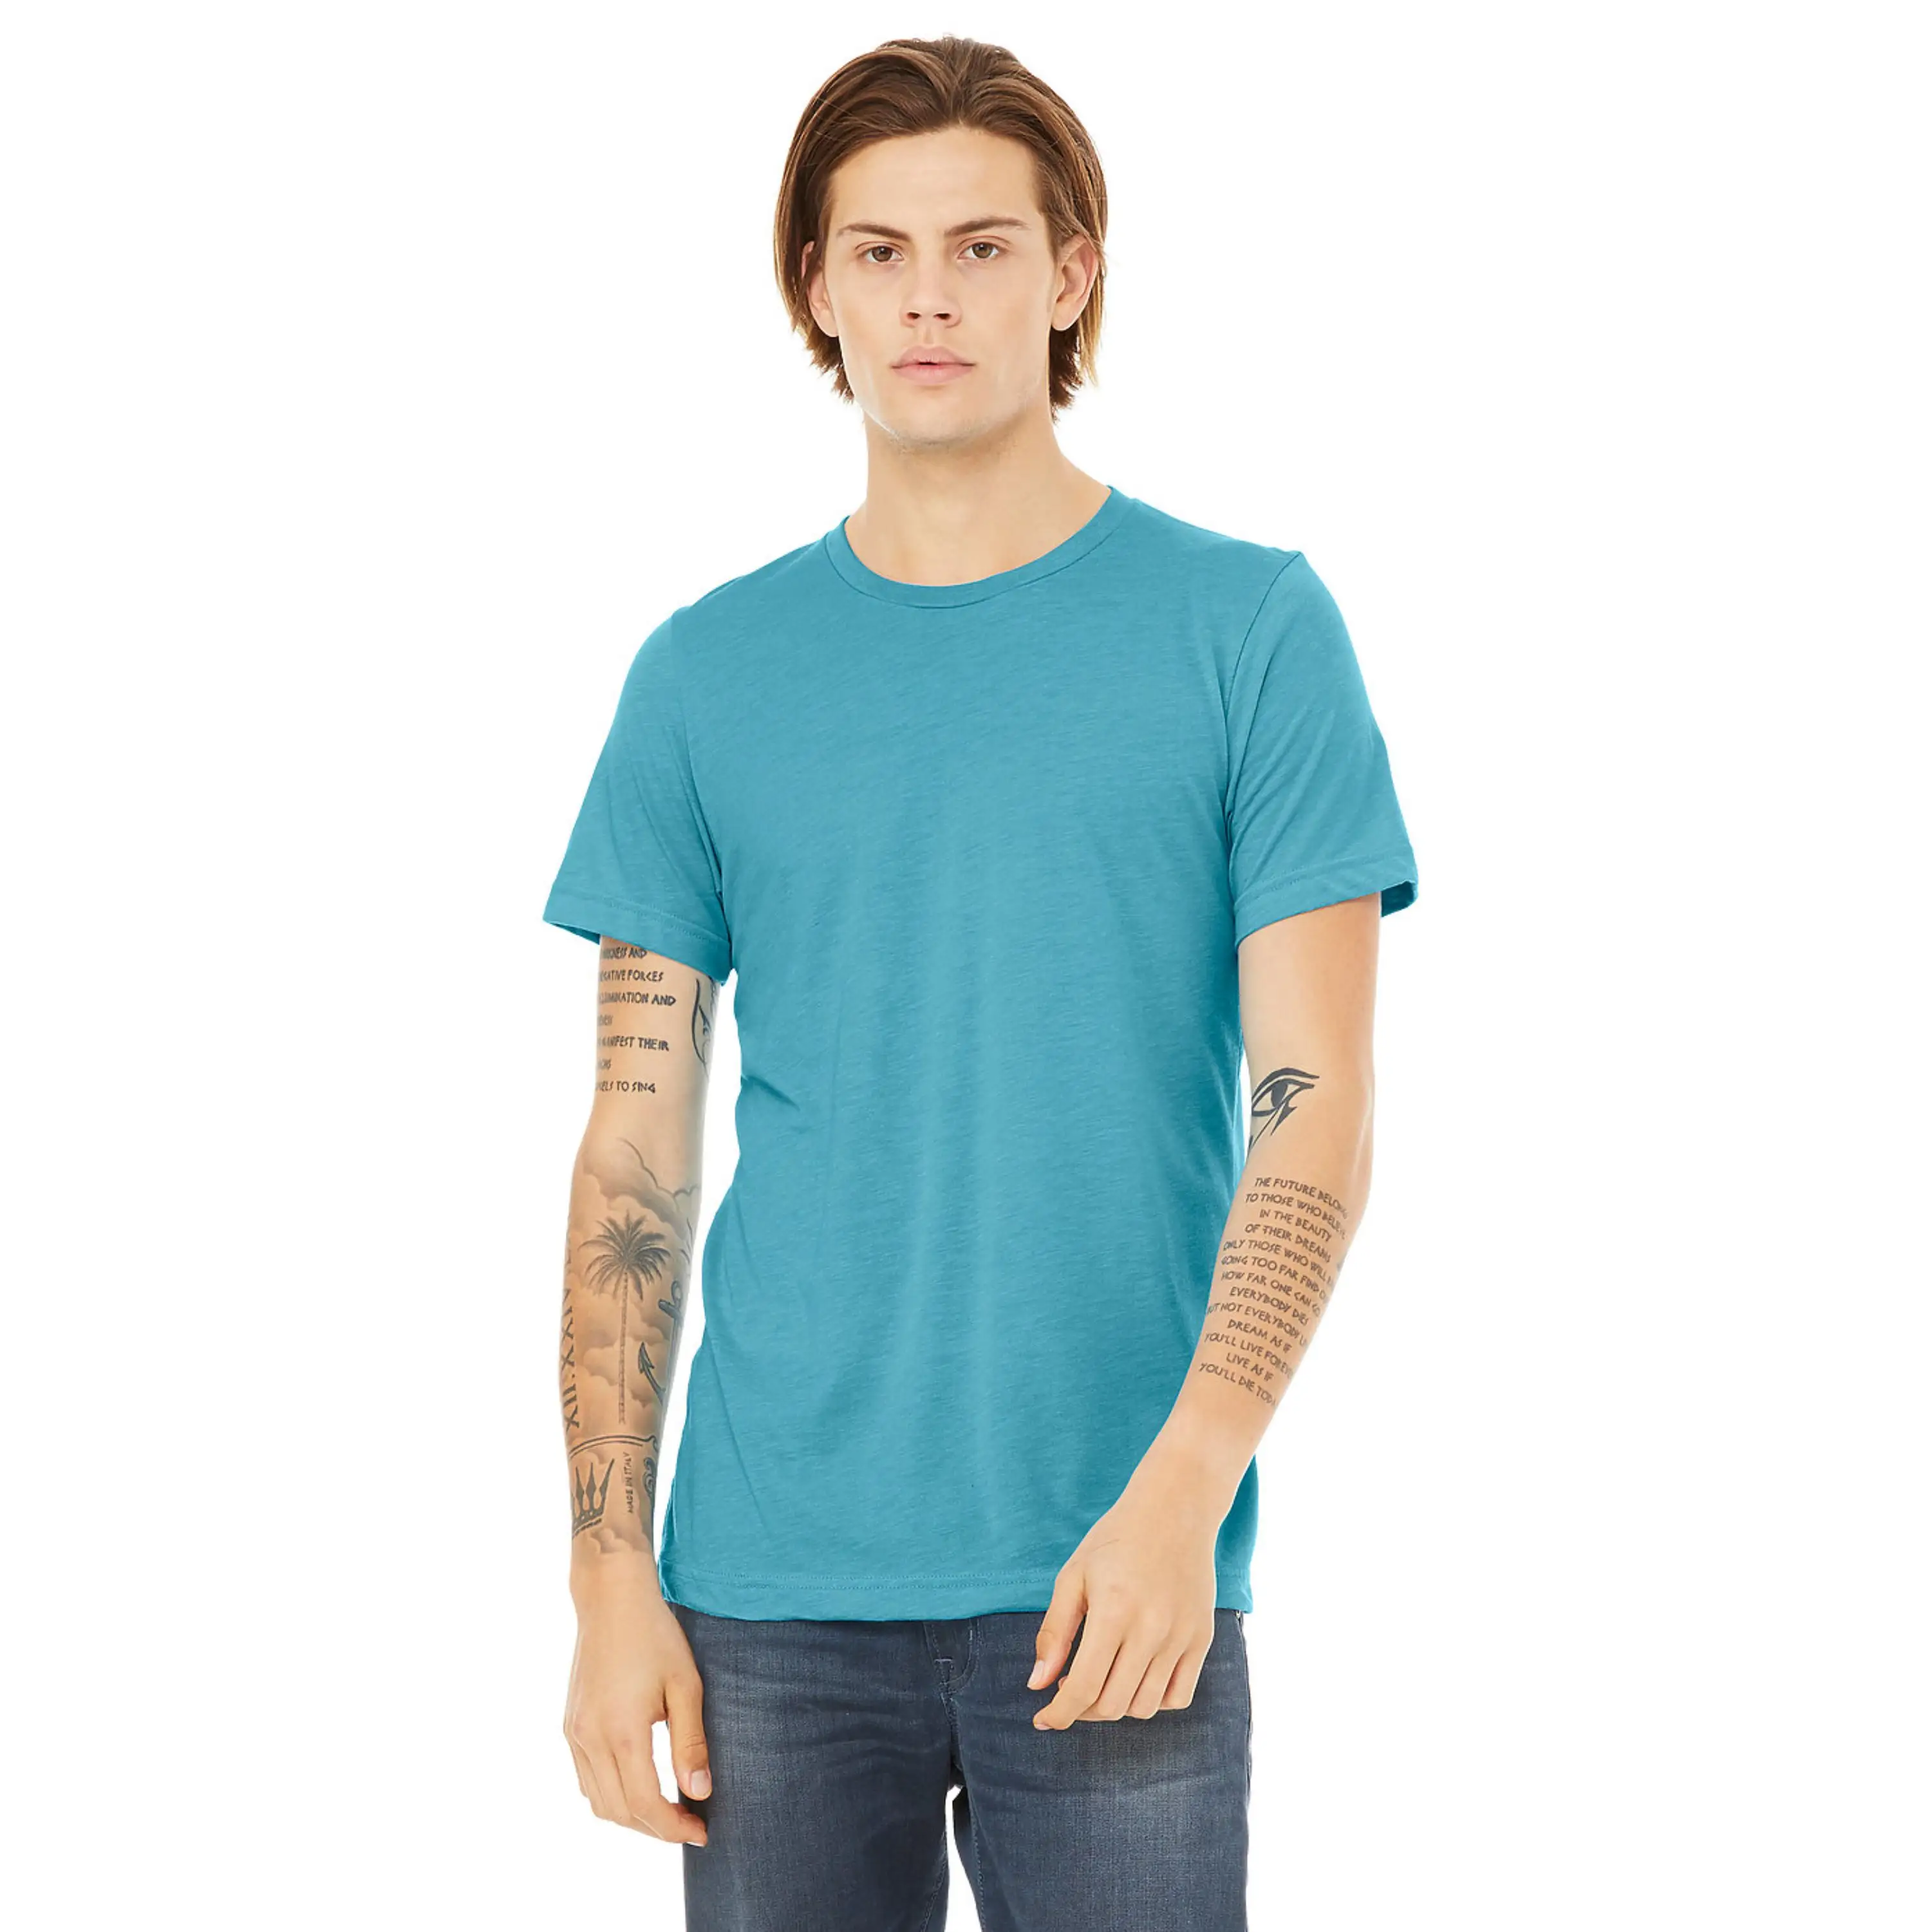 50% Poly 25% Airlume Combed and Ring Spun Cotton 25% Rayon 40 Single 3.8 oz Aqua Unisex Short Sleeves T-Shirt